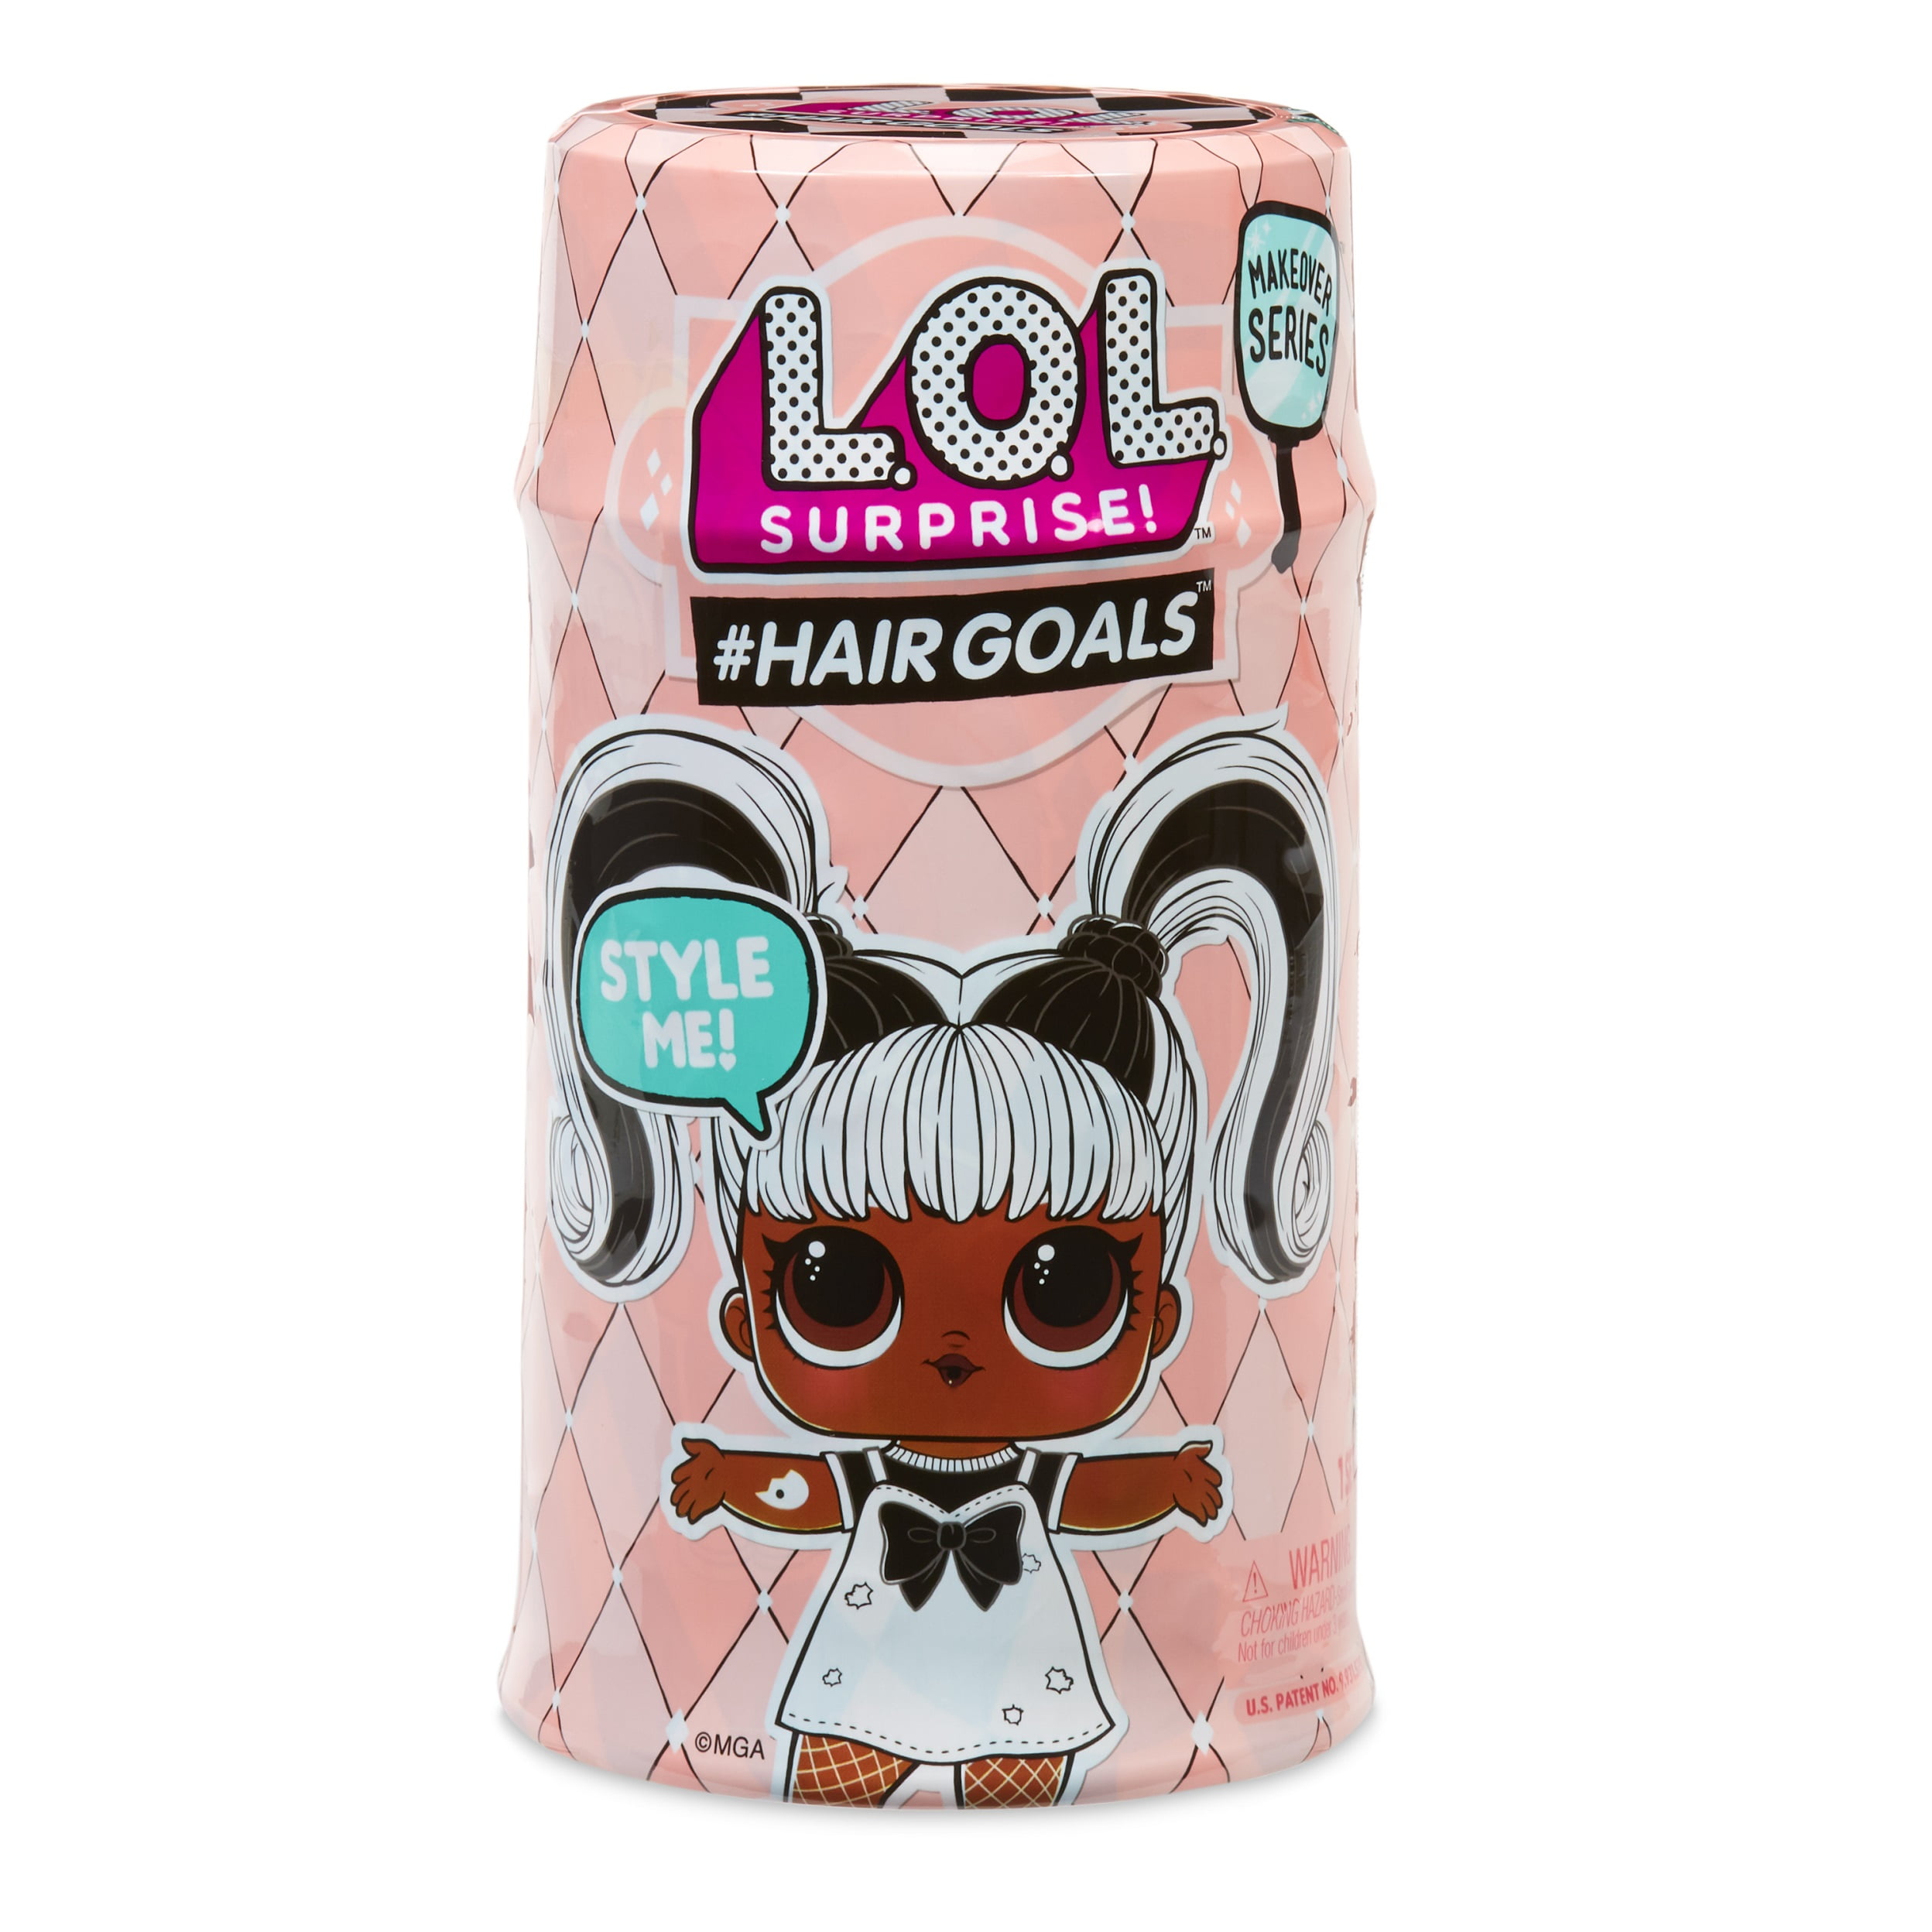 15 Surprises Sealed Lol Surprise AUTHENTIC #HAIR GOALS MAKEOVER SERIES 2 Doll 